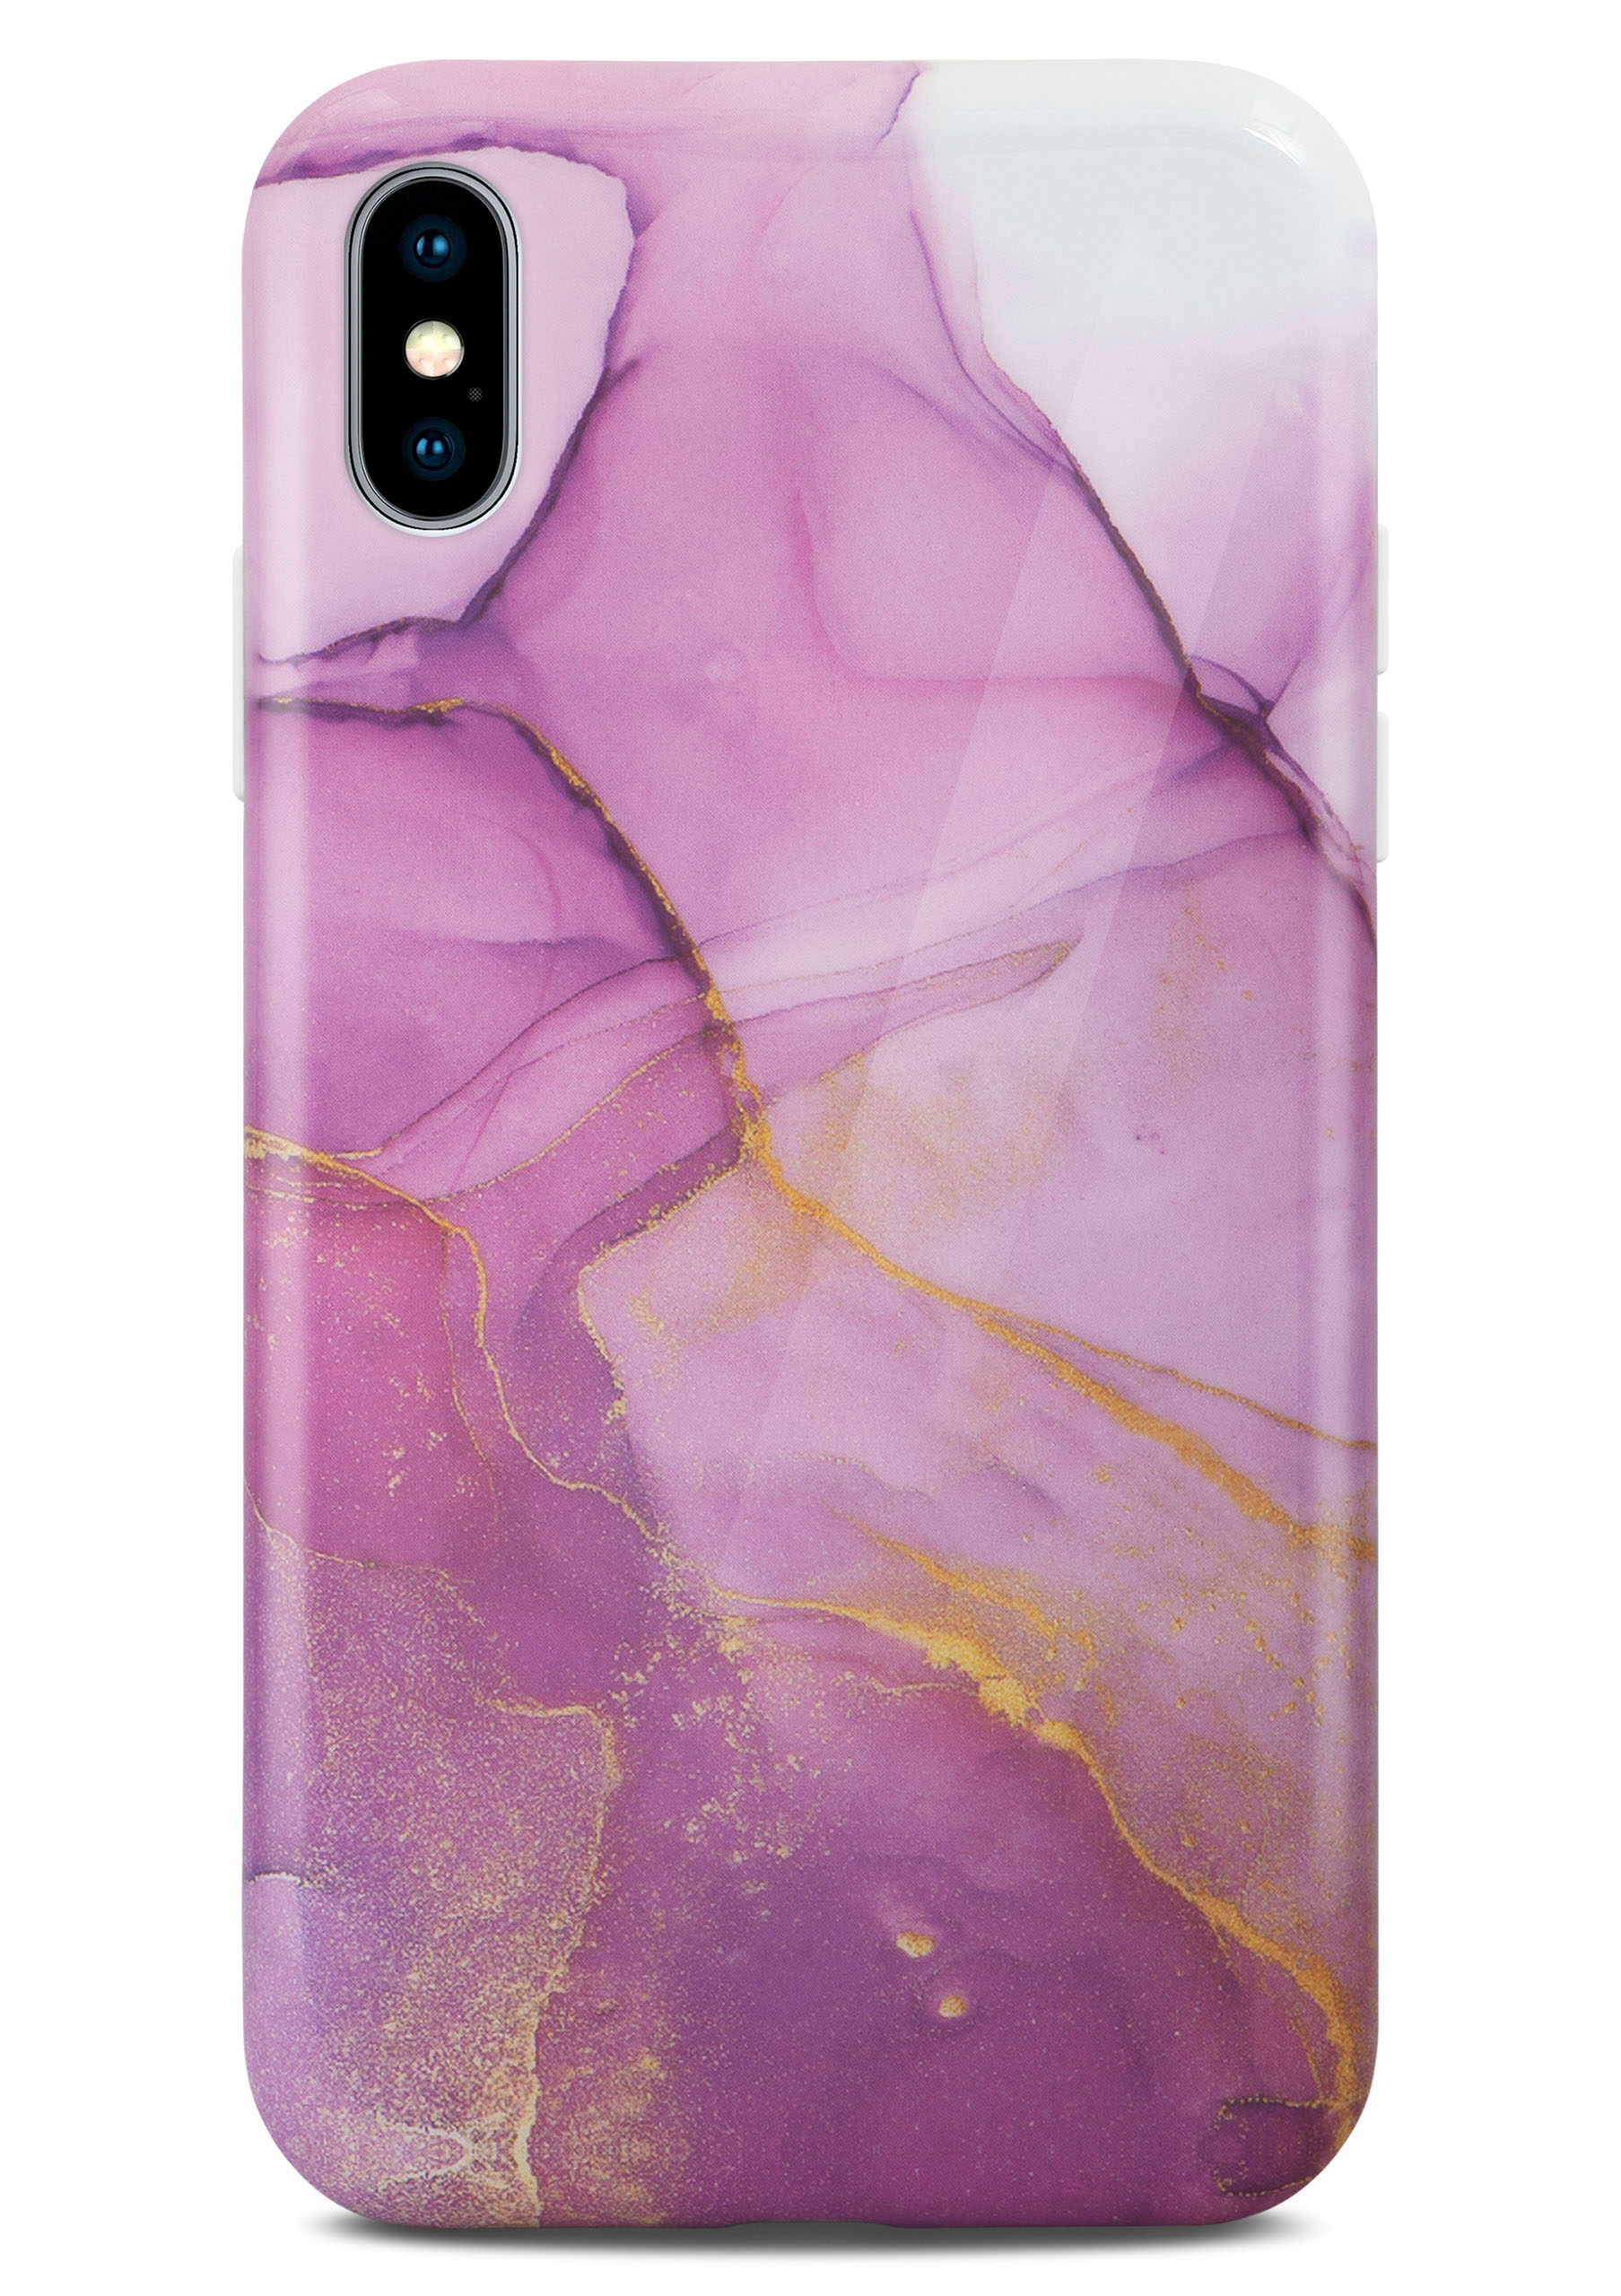 ONEFLOW Sense Apple, XS, Case, iPhone X Affection Backcover, iPhone 